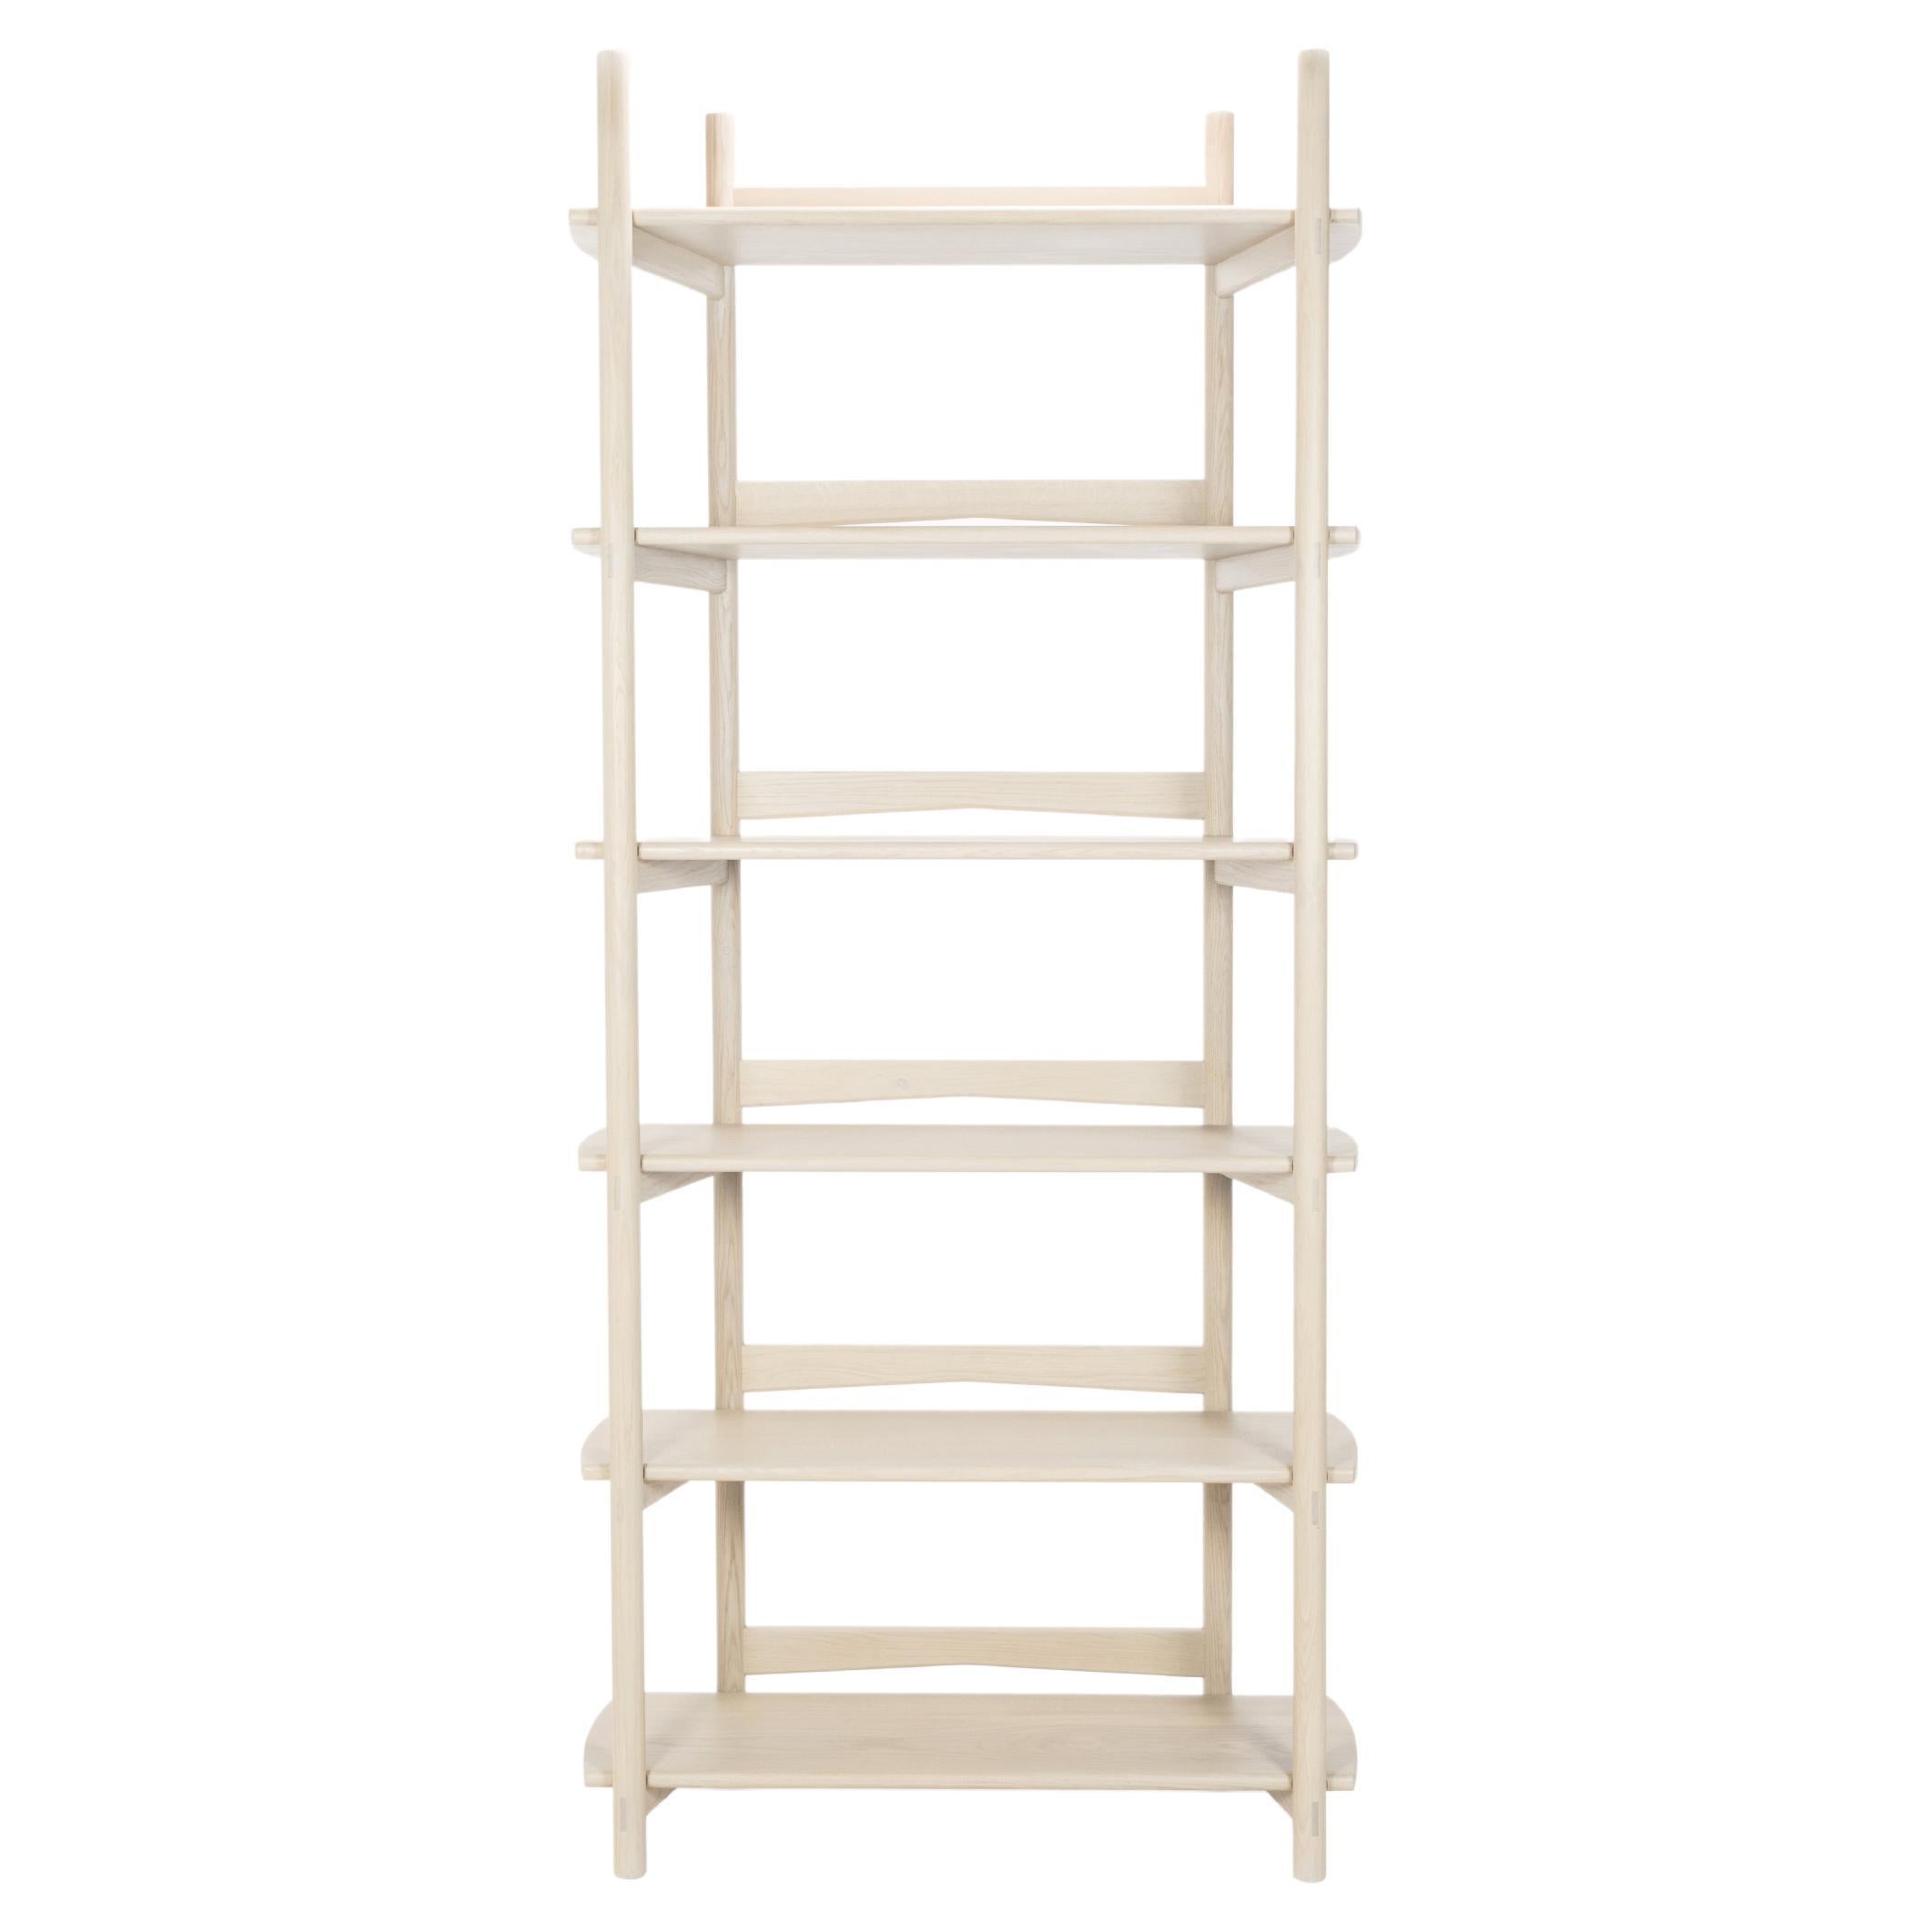 Mora Bookcase by Sun at Six, Nude, Minimalist Bookcase in Wood For Sale